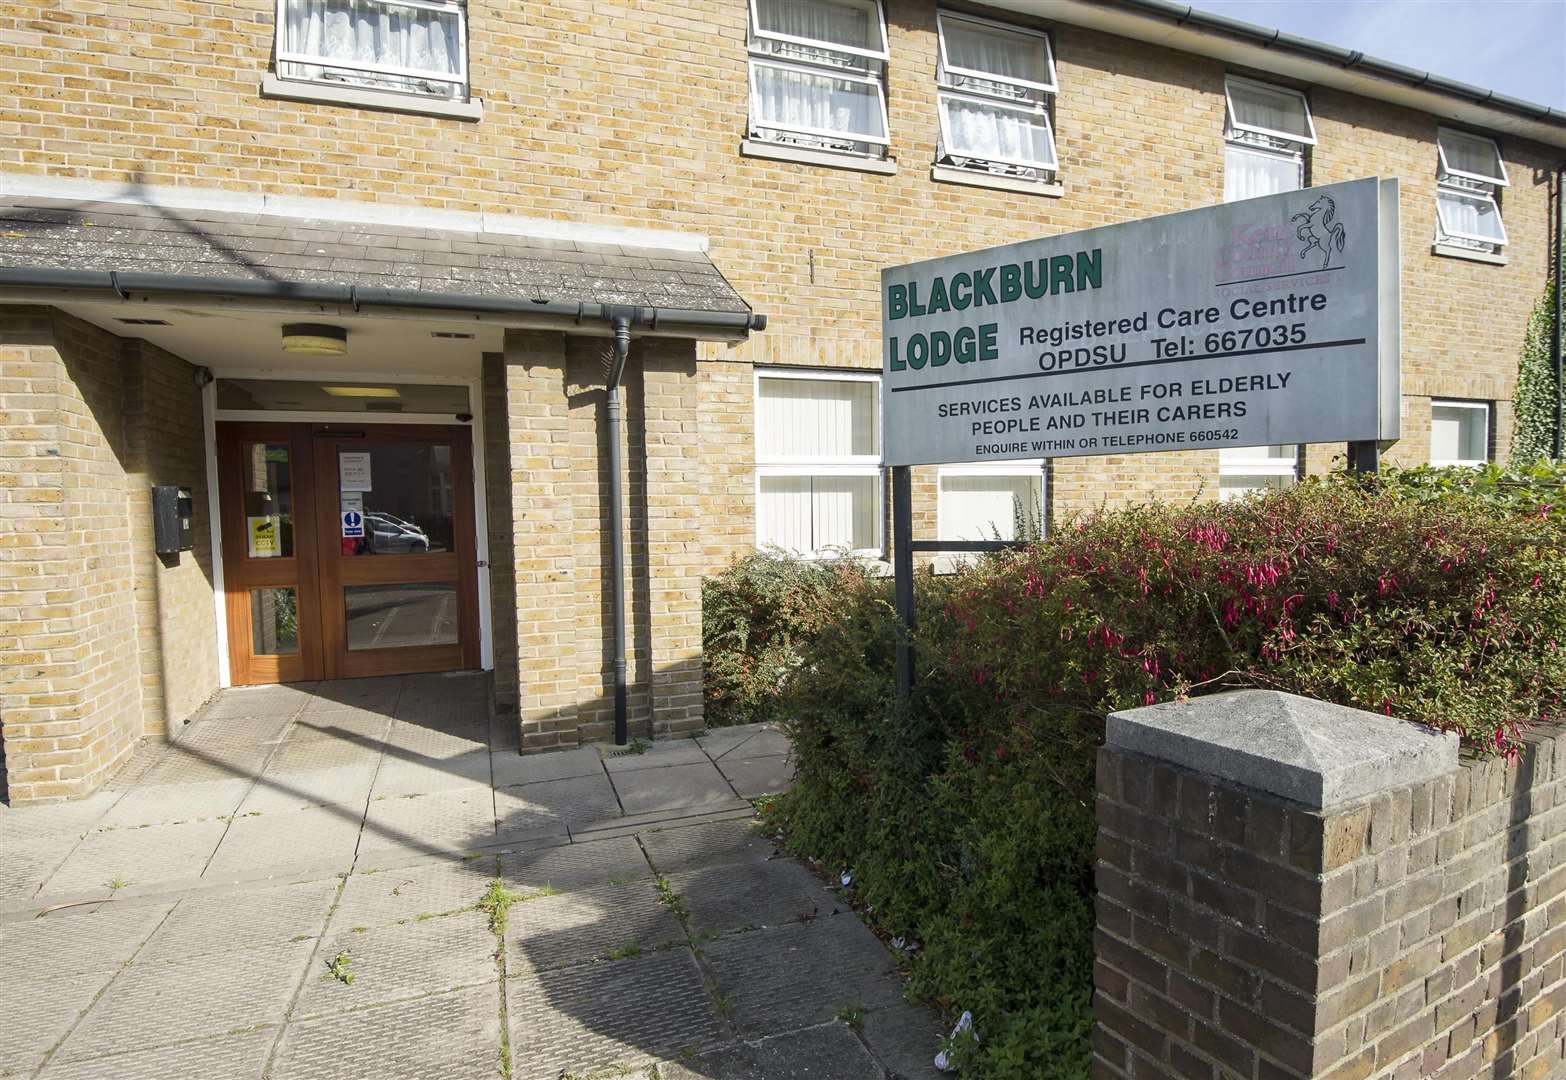 Blackburn Lodge in Broadway, Sheerness shut suddenly earlier this month